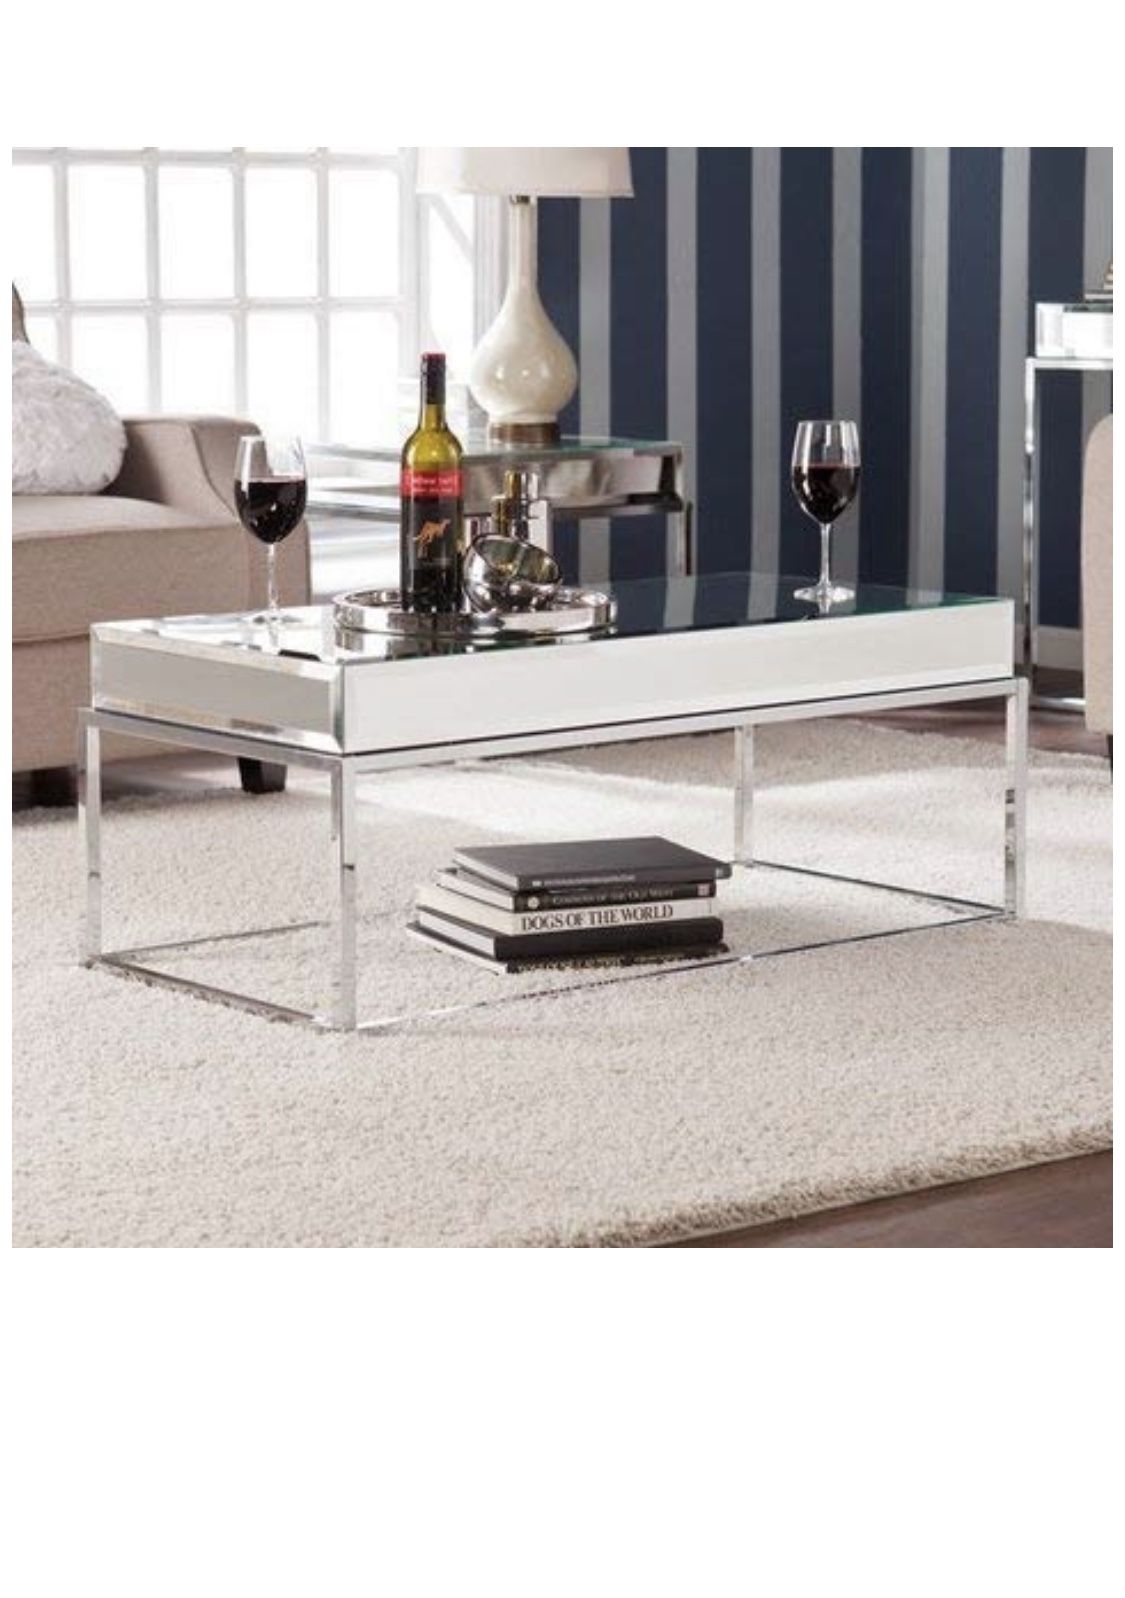 Upton Home mirrored coffee table